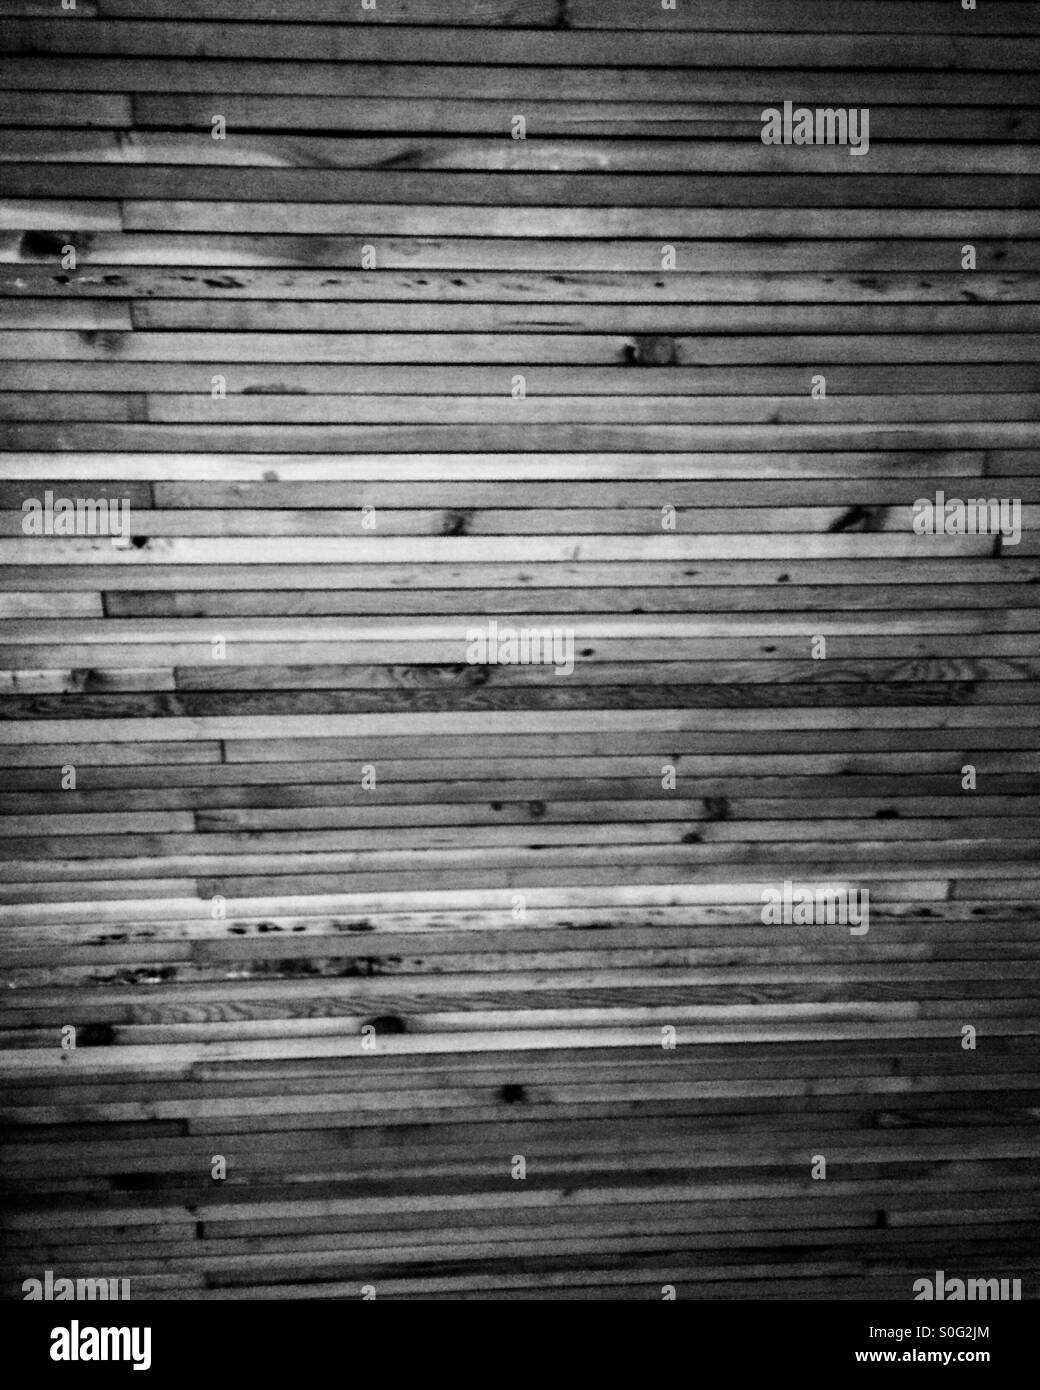 Wood paneling in black and white Stock Photo